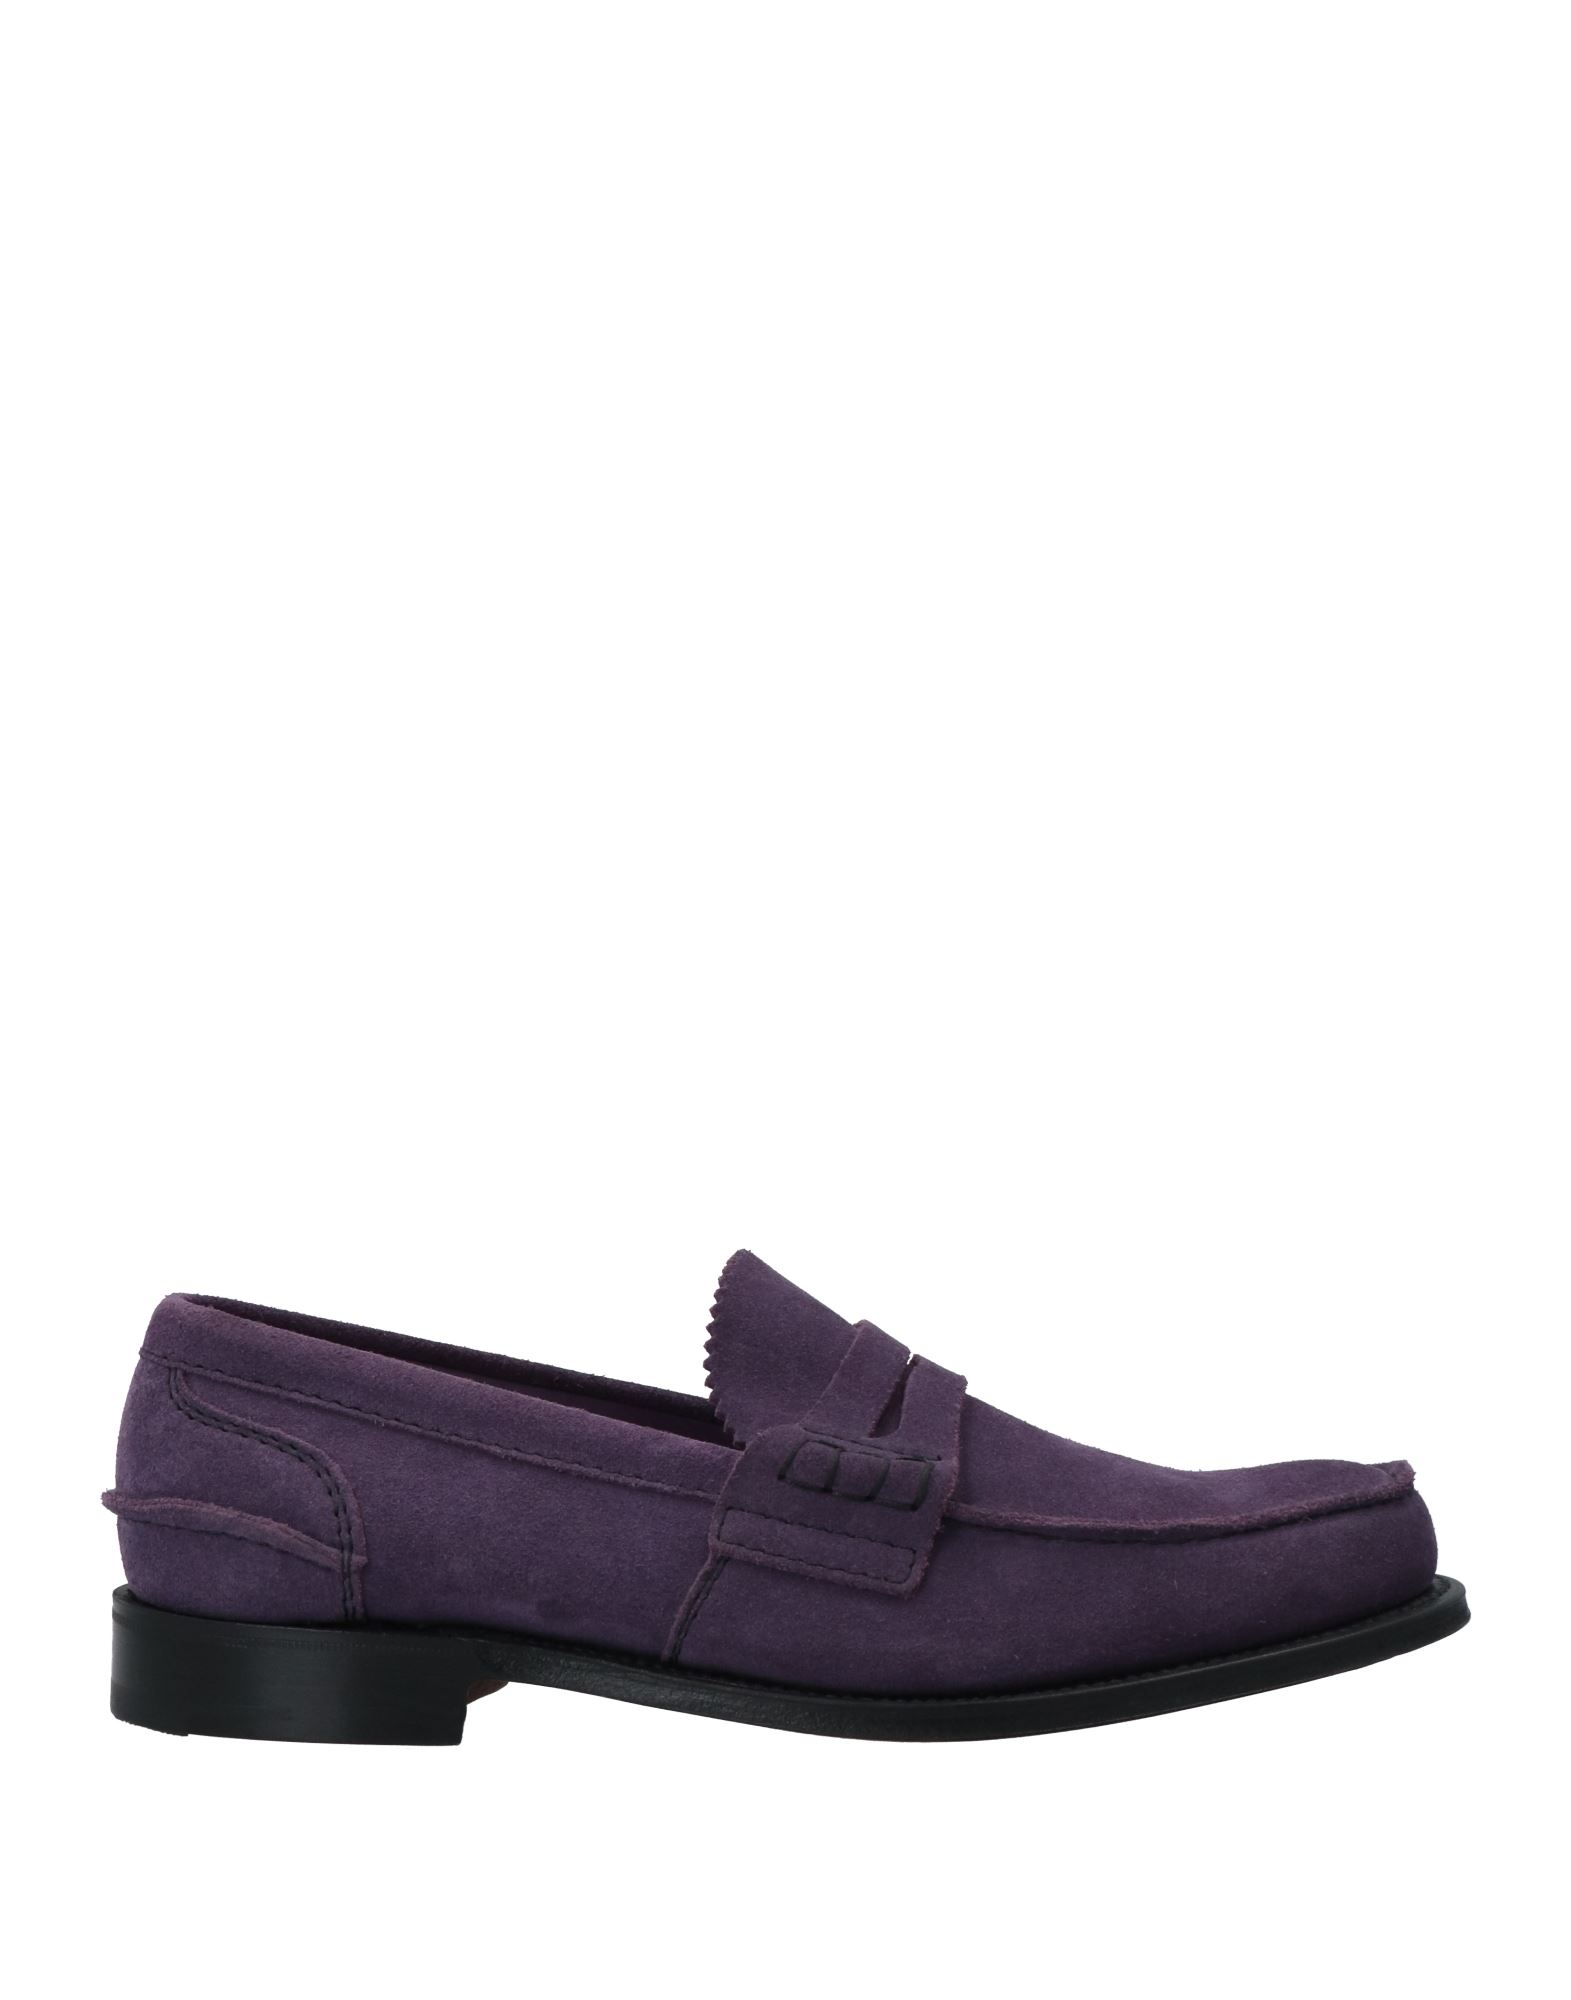 Church's Man Loafers Purple Size 7 Soft Leather